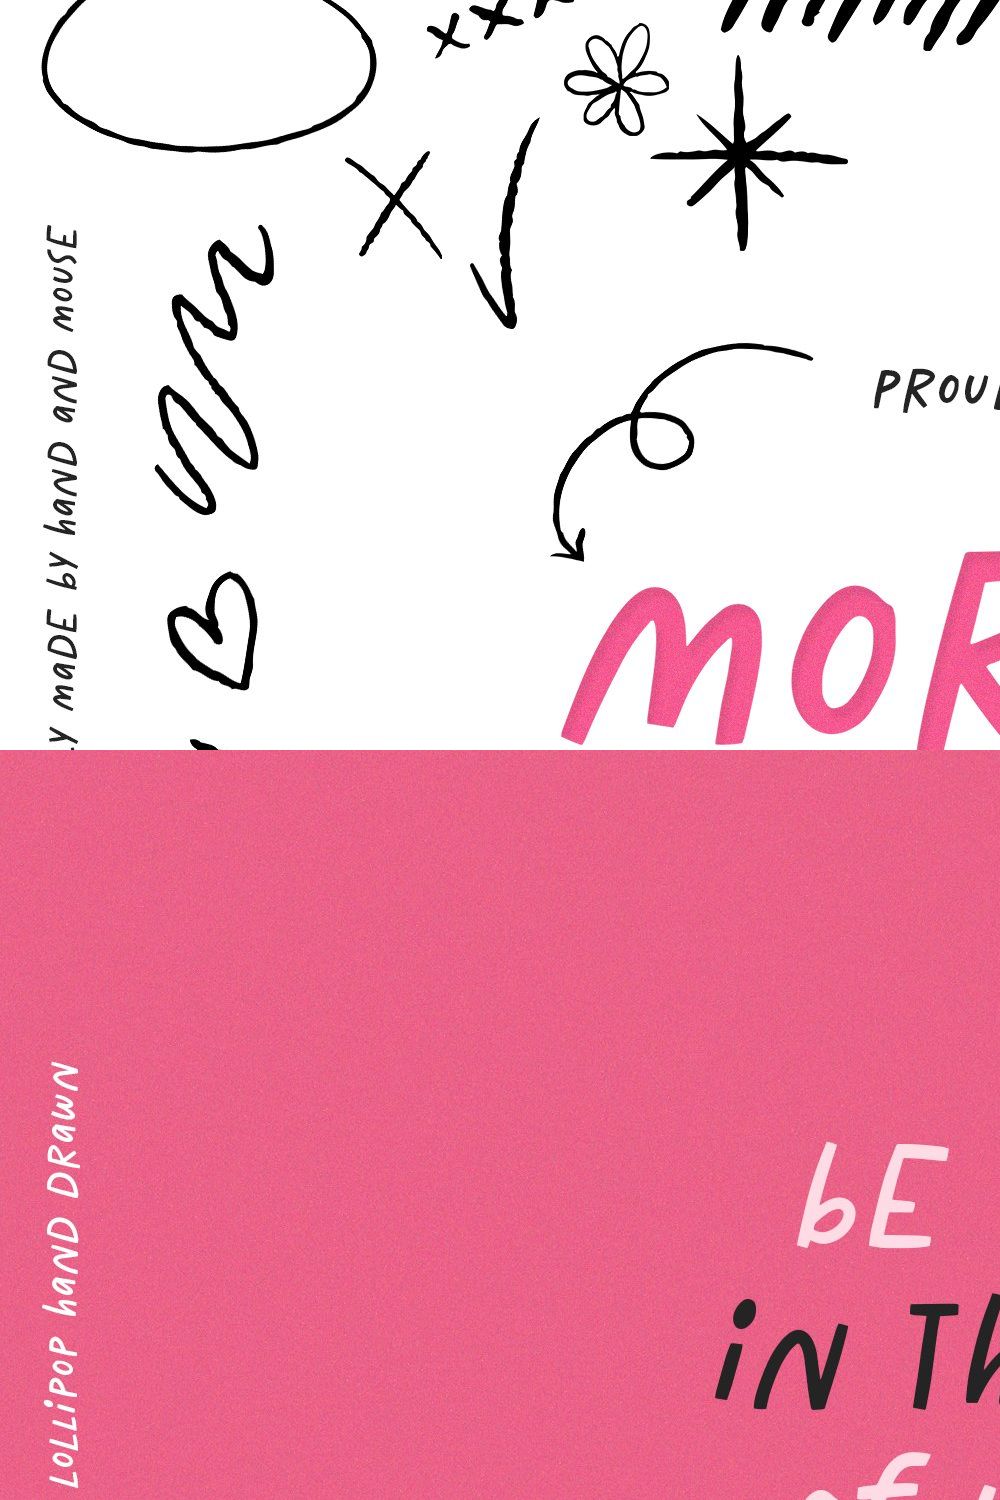 Morning Sketches Font pinterest preview image.